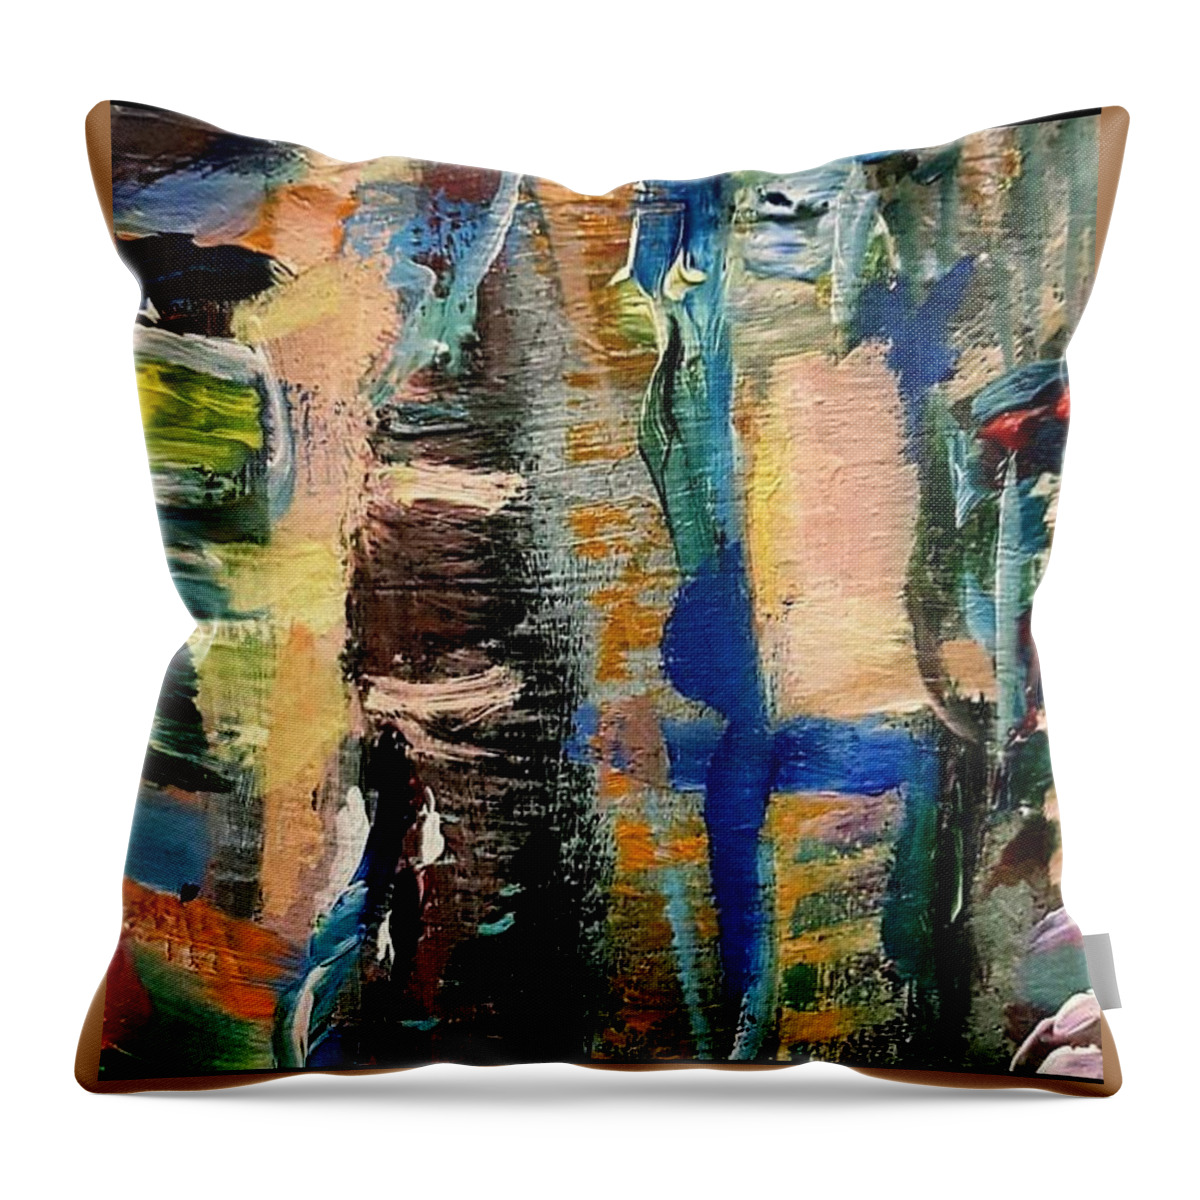 Jazz Throw Pillow featuring the painting Jazz Time by Julie TuckerDemps